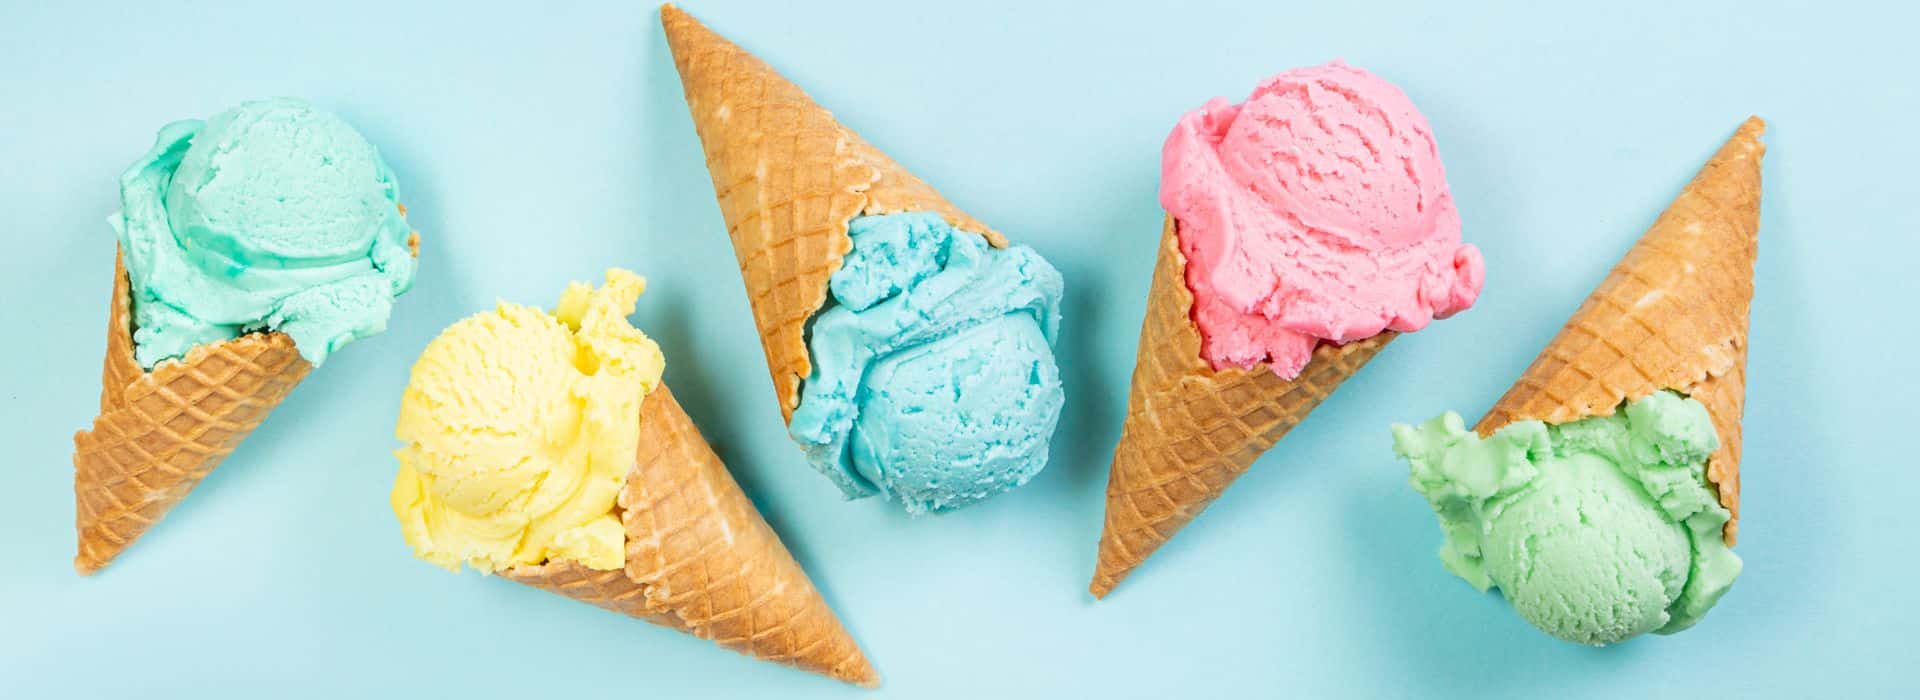 Row of waffle cones with different colored ice cream